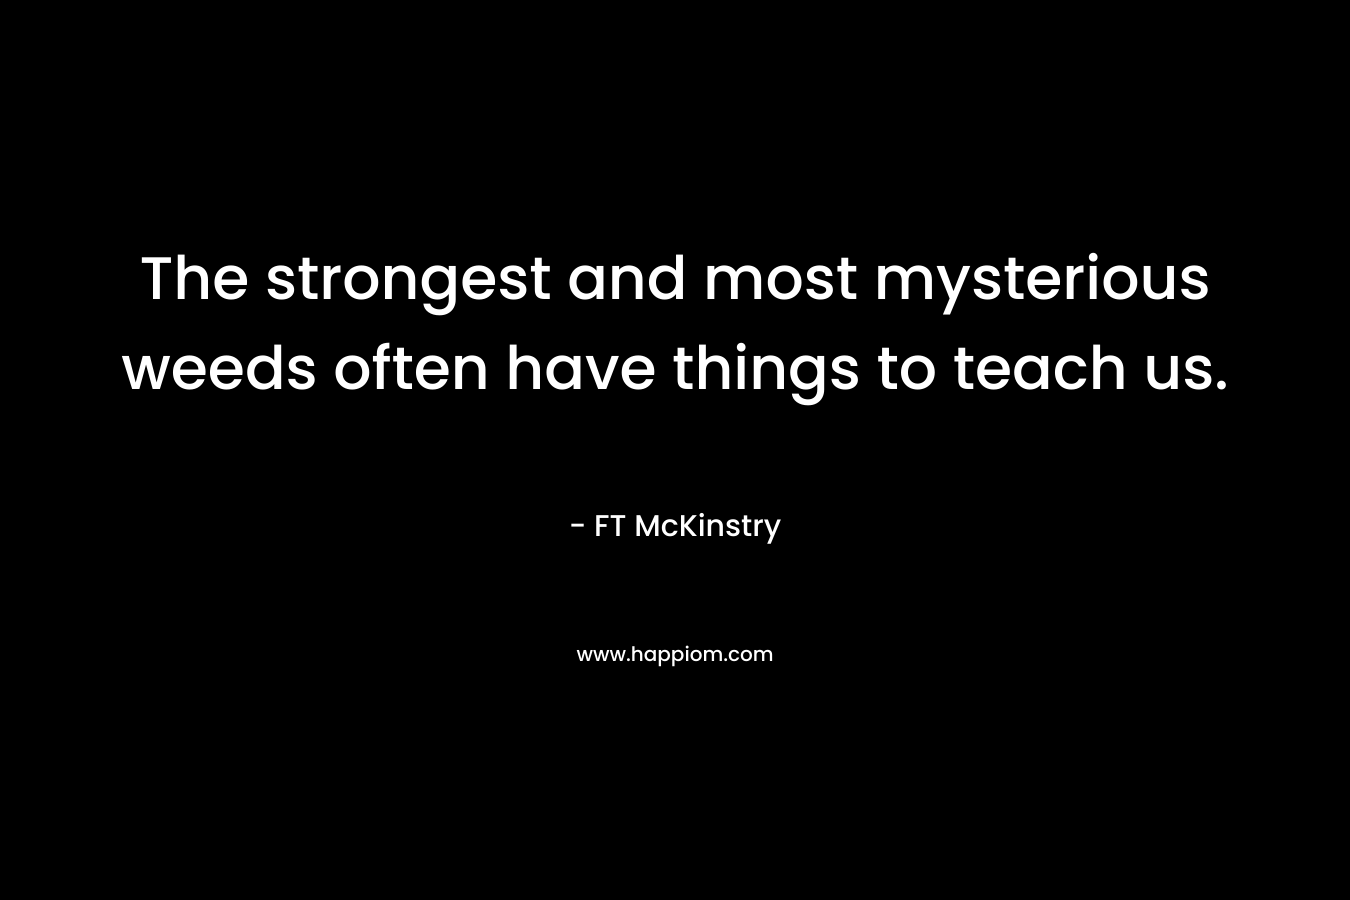 The strongest and most mysterious weeds often have things to teach us. – FT McKinstry